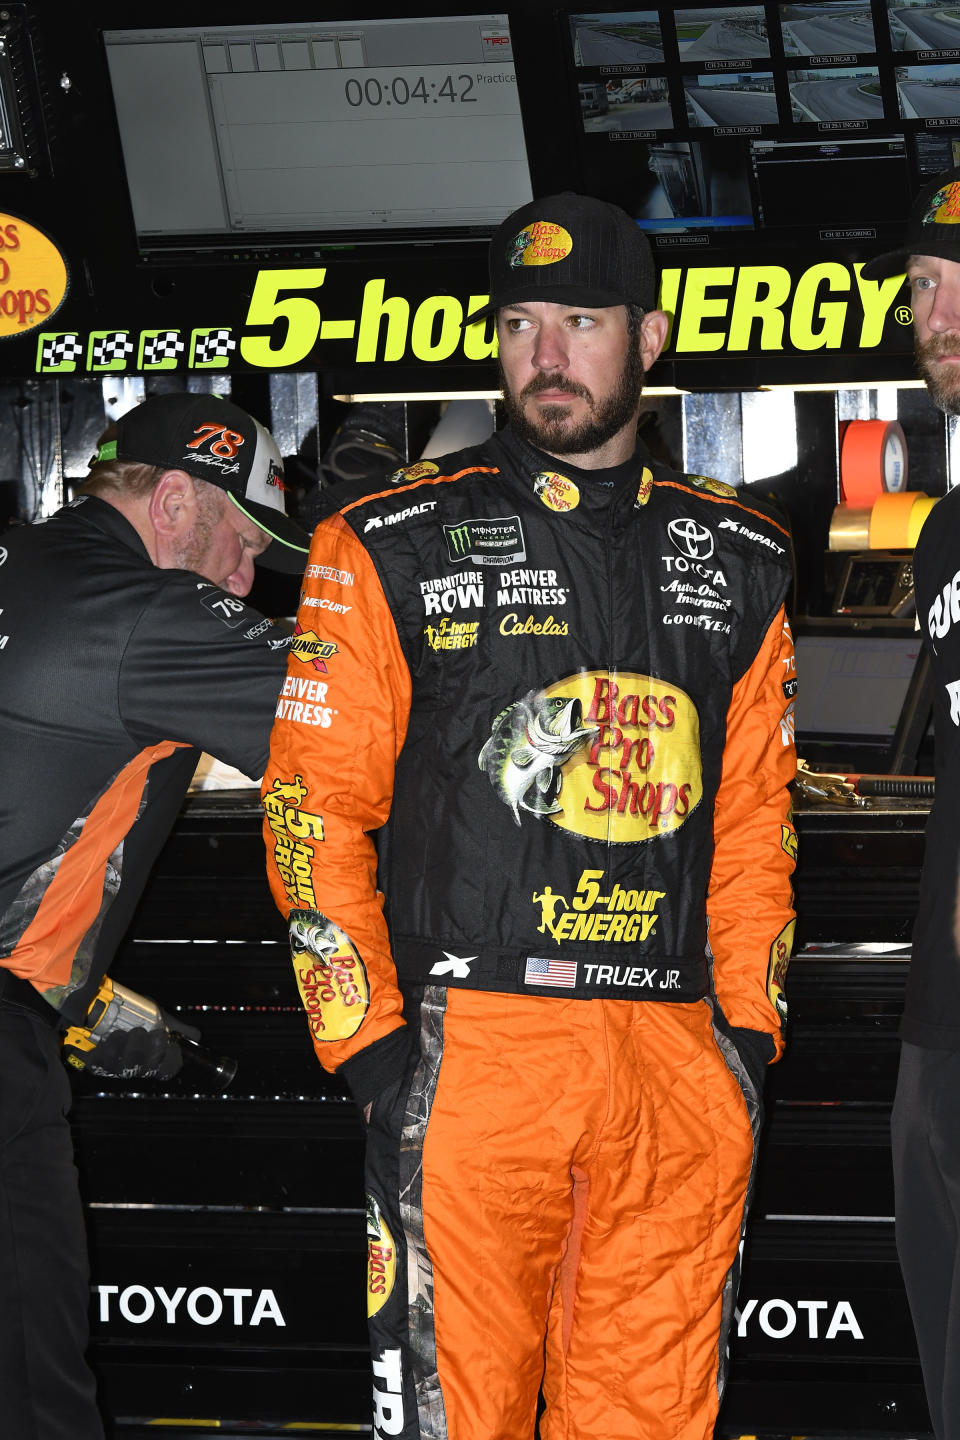 NASCAR Monster Energy Cup Series driver Martin Truex, Jr. stands in the garage area before practice for Sunday's race at Texas Motor Speedway, Saturday, Nov. 3, 2018, in Fort Worth, Texas. (AP Photo/Larry Papke)